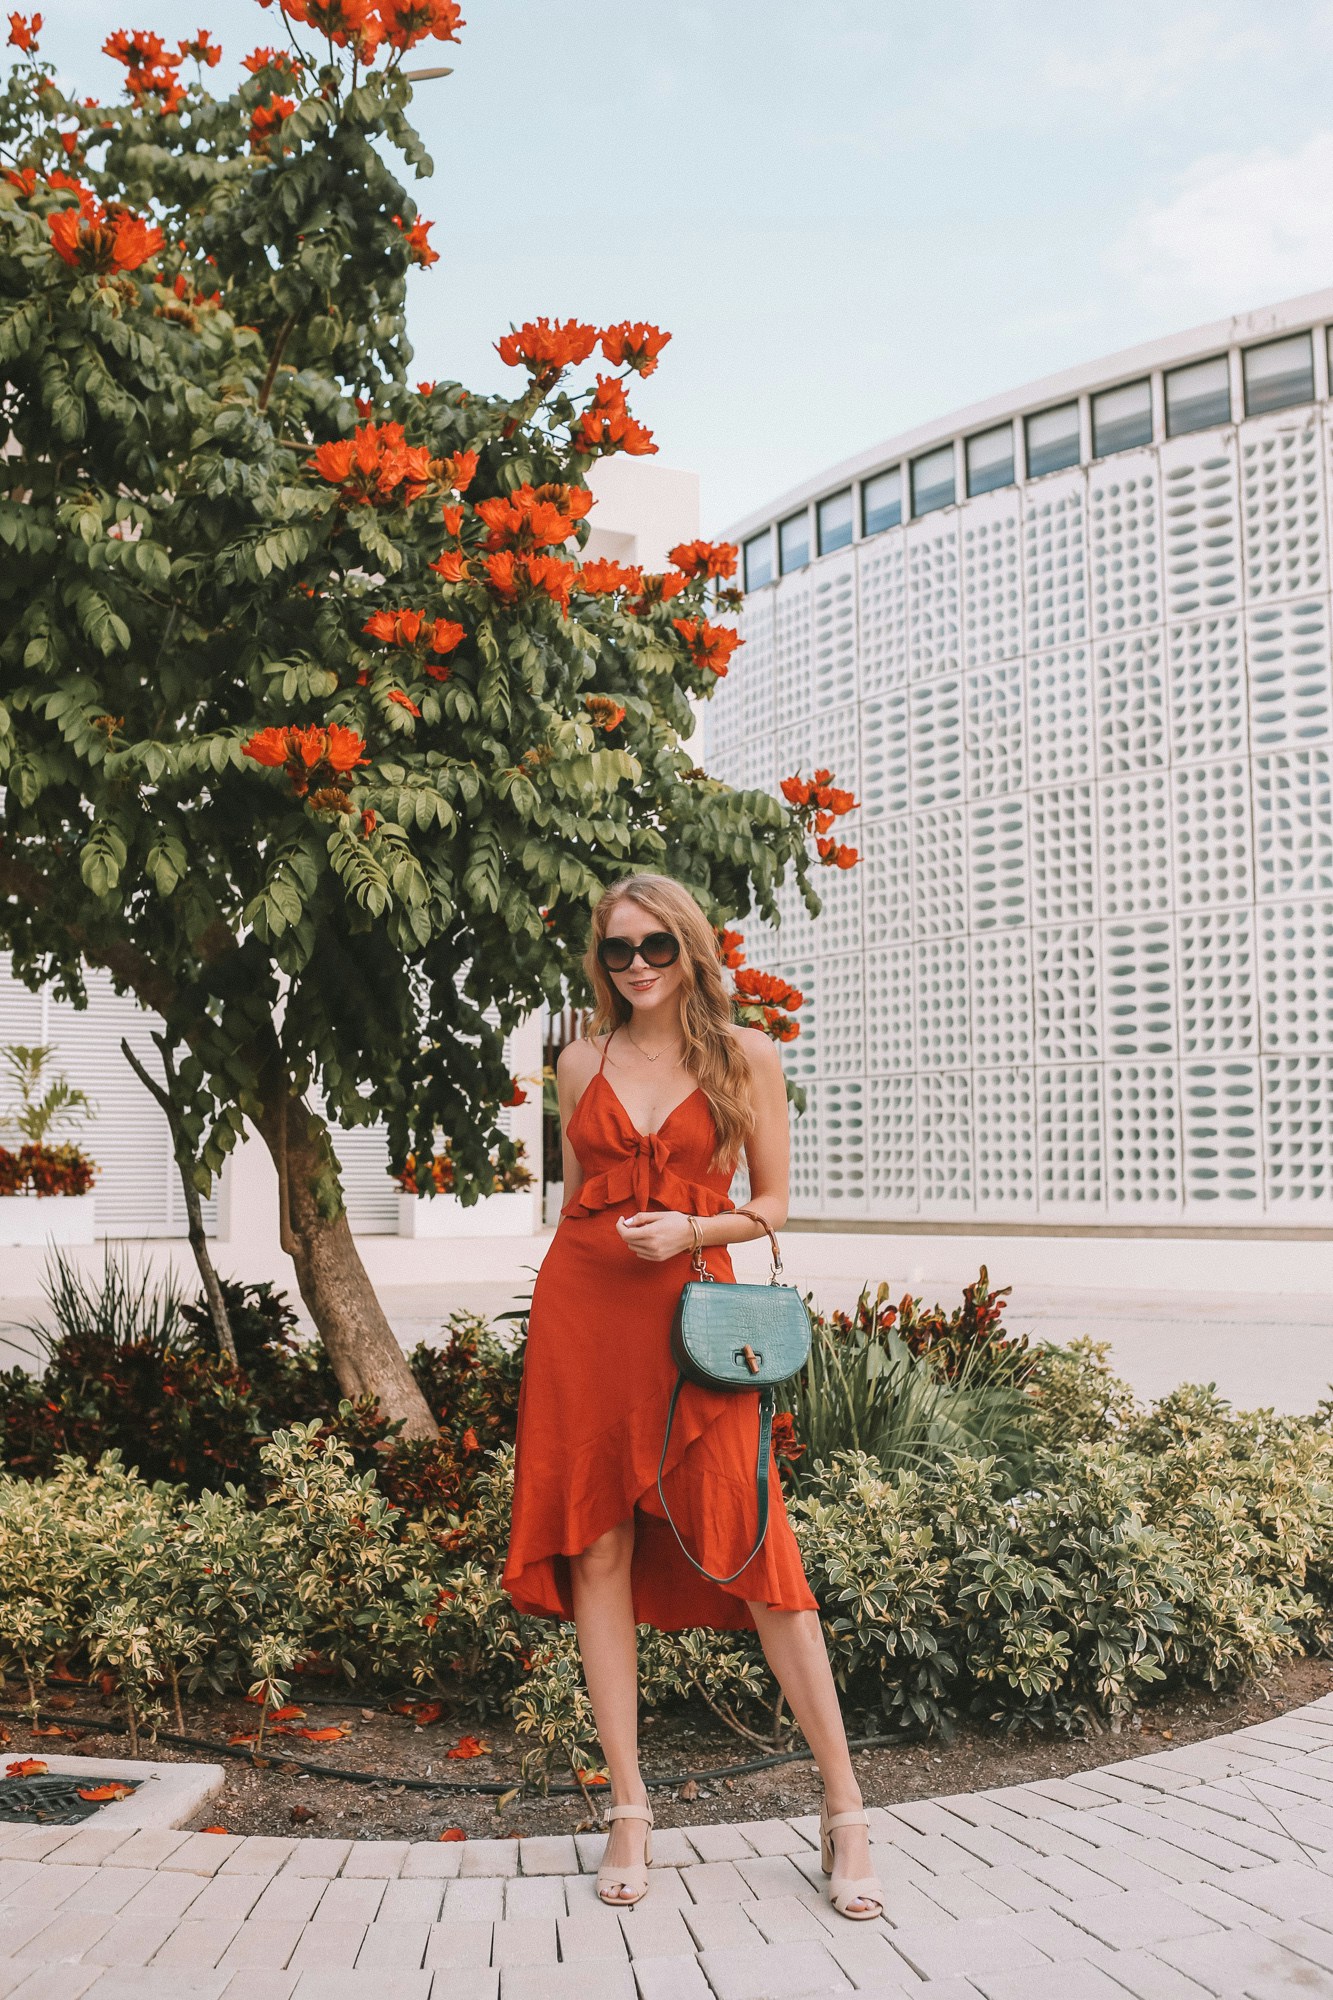 What to wear in the Mayan Riviera? I'm sharing this orange linen dress and statement accessories as outfit inspiration, as well as a packing list for a chic resort wear wardrobe that's perfect for visiting Mexico in winter!